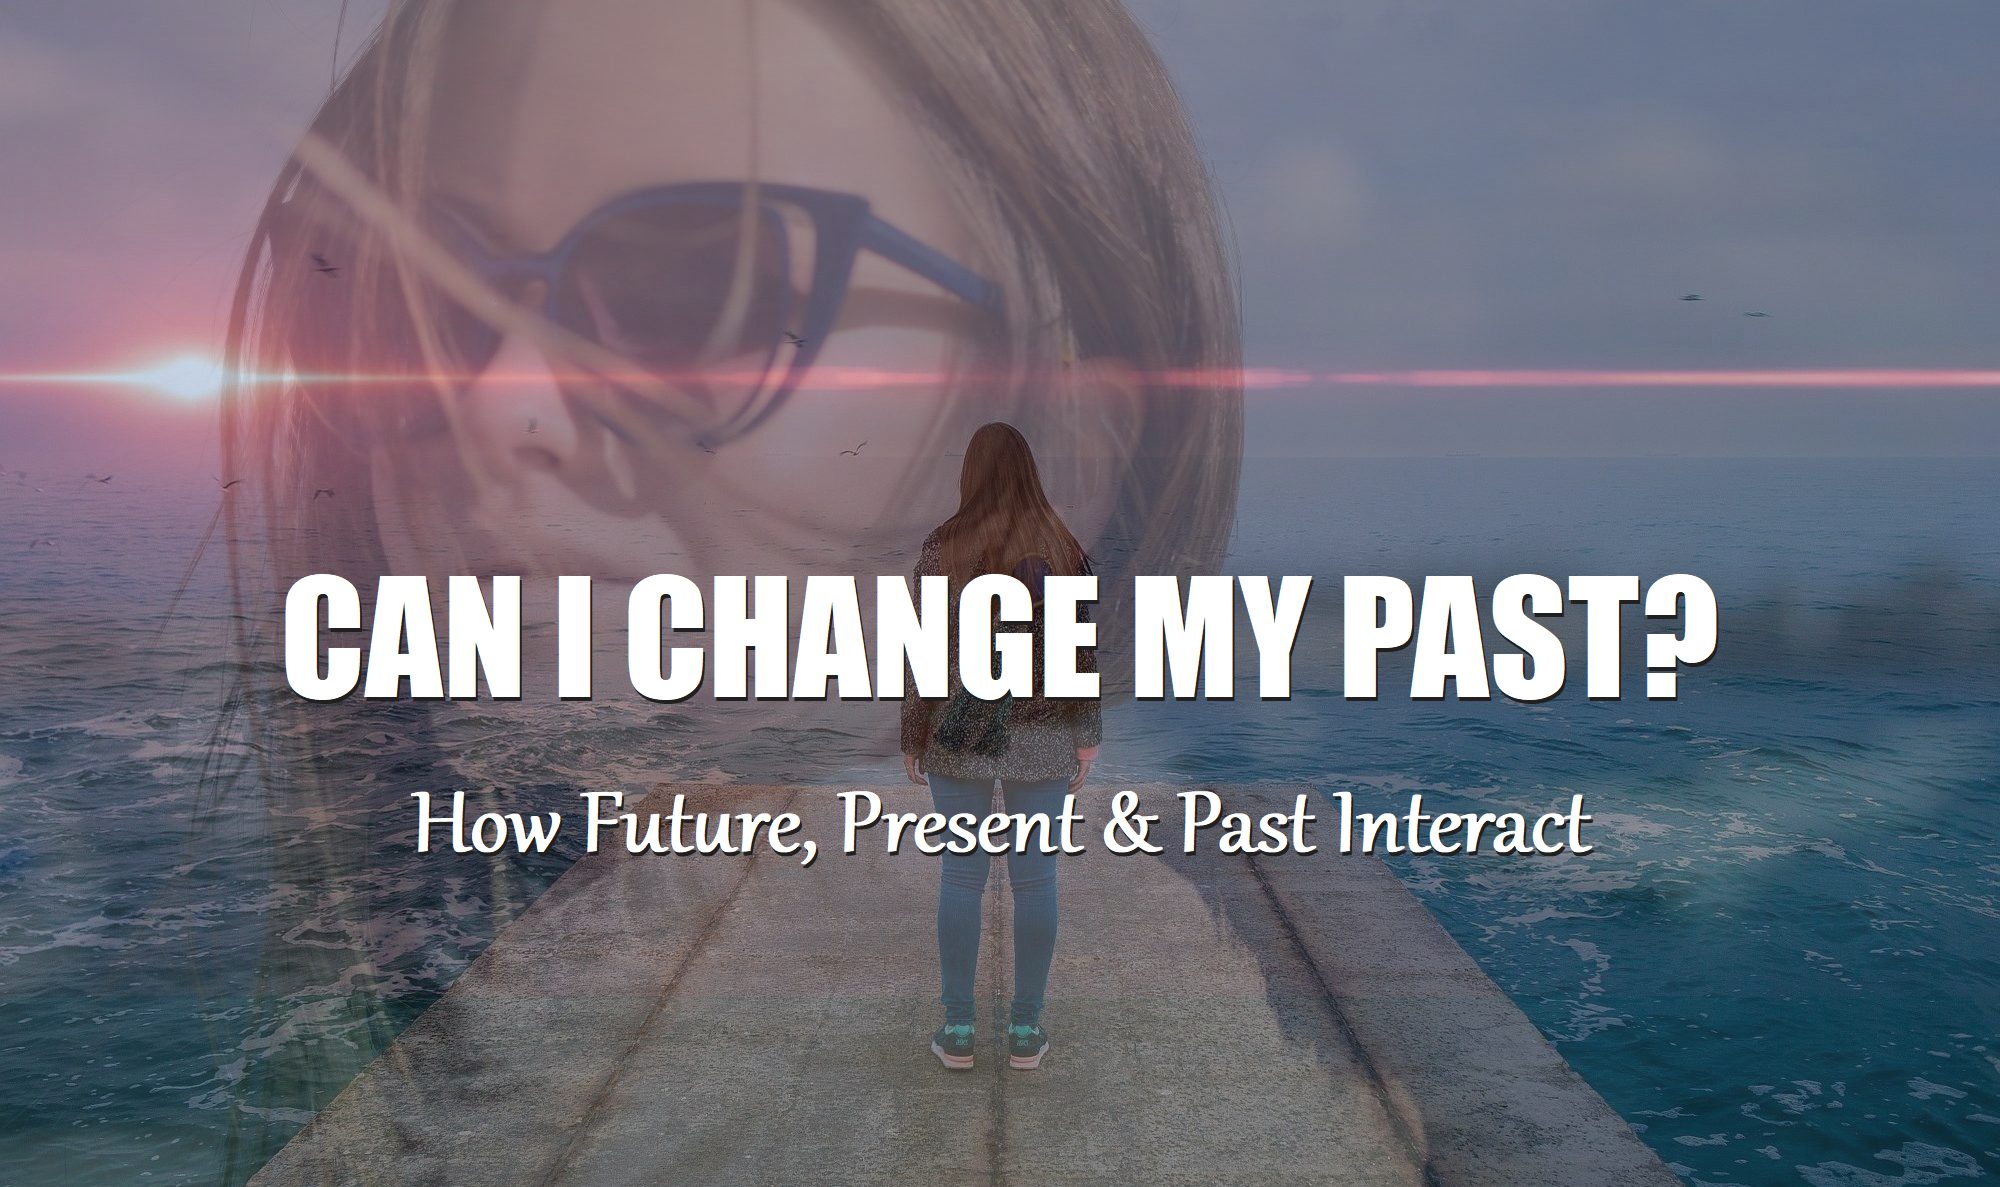 Can I Change My Past? How Does Future, Present & Past Interact?